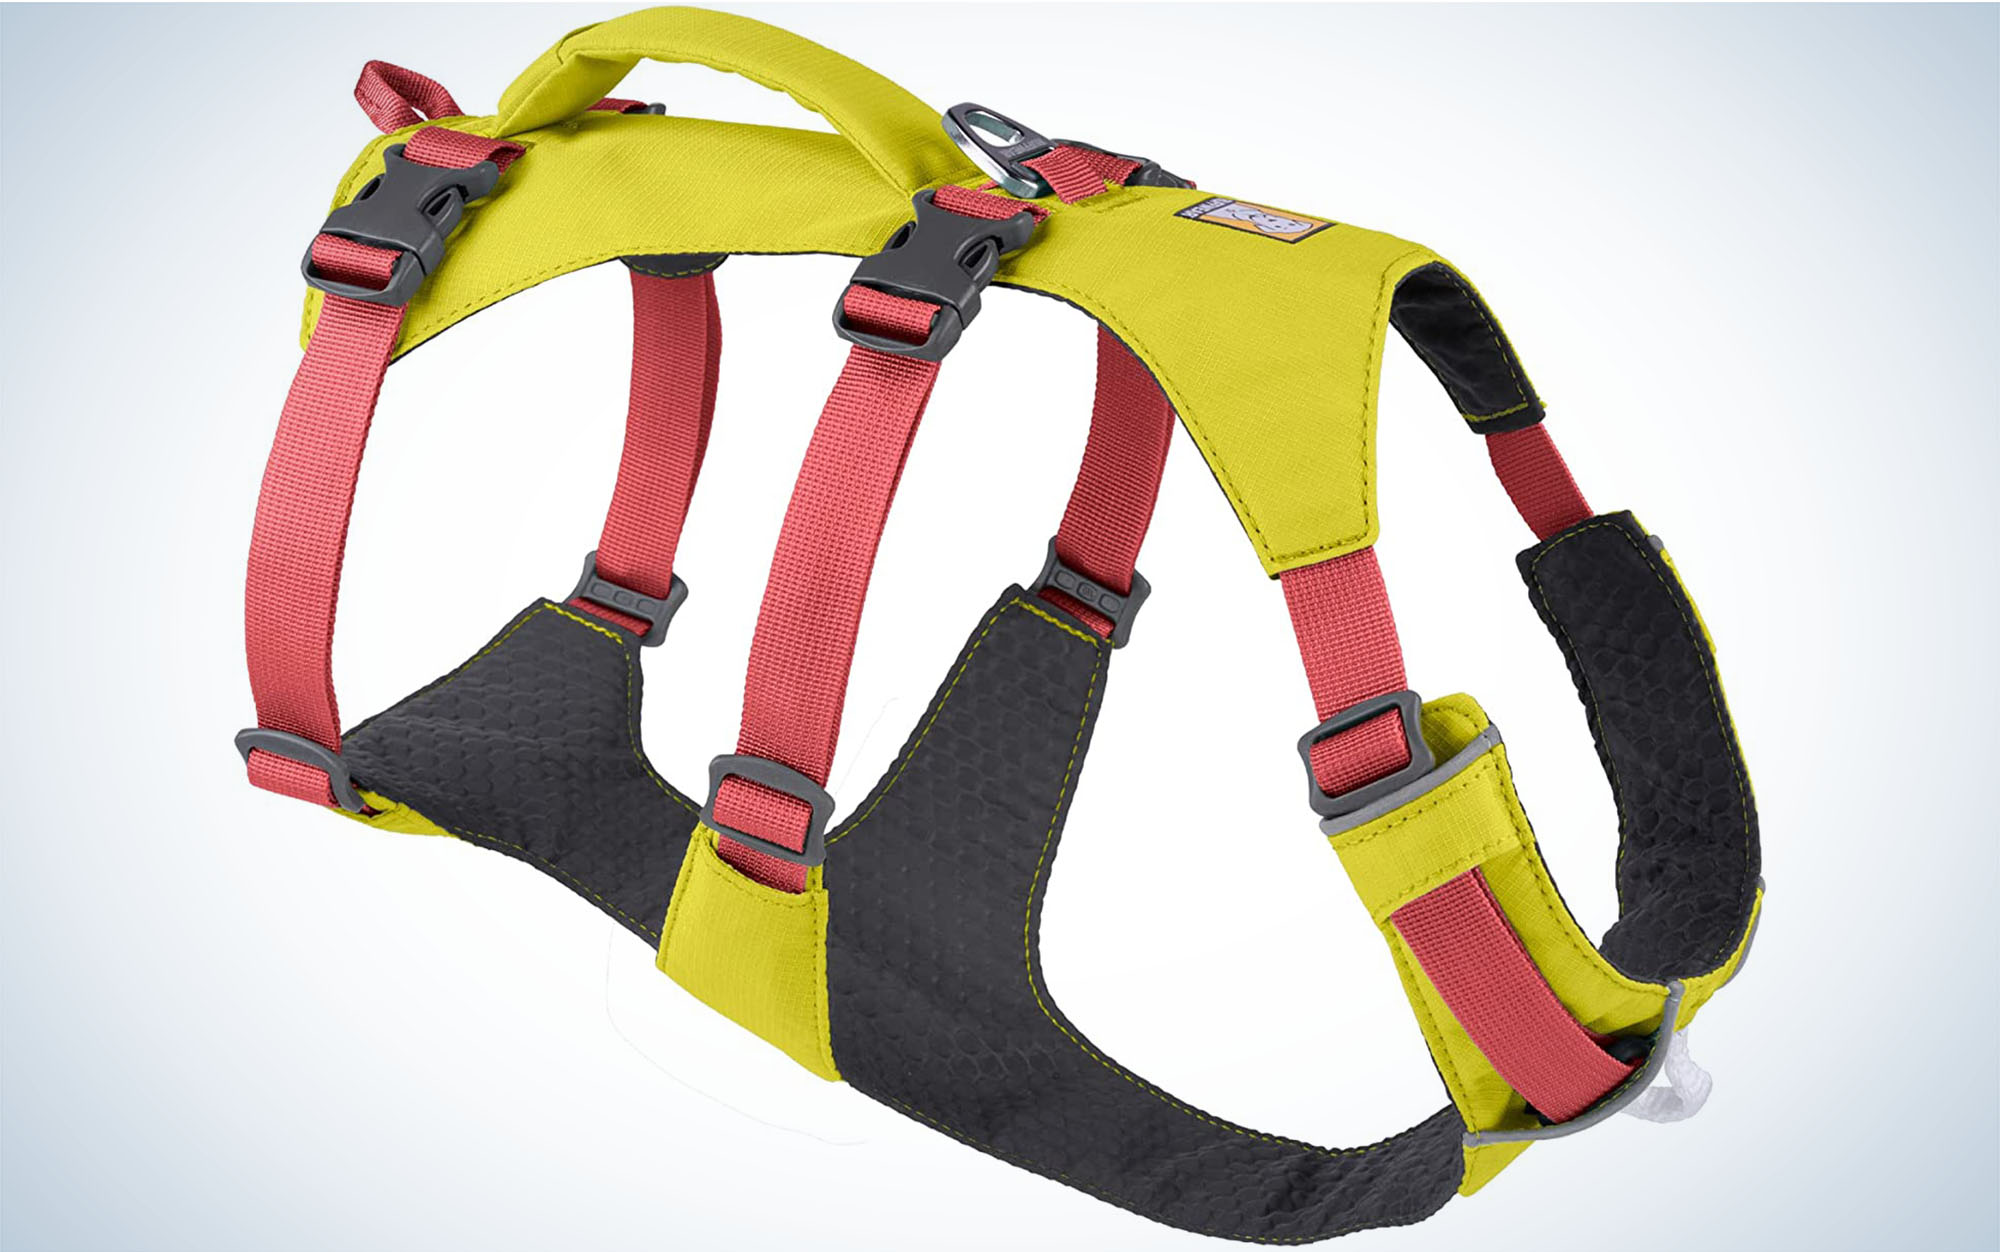 The Ruffwear Flagline Dog Harness is best for mature dogs.